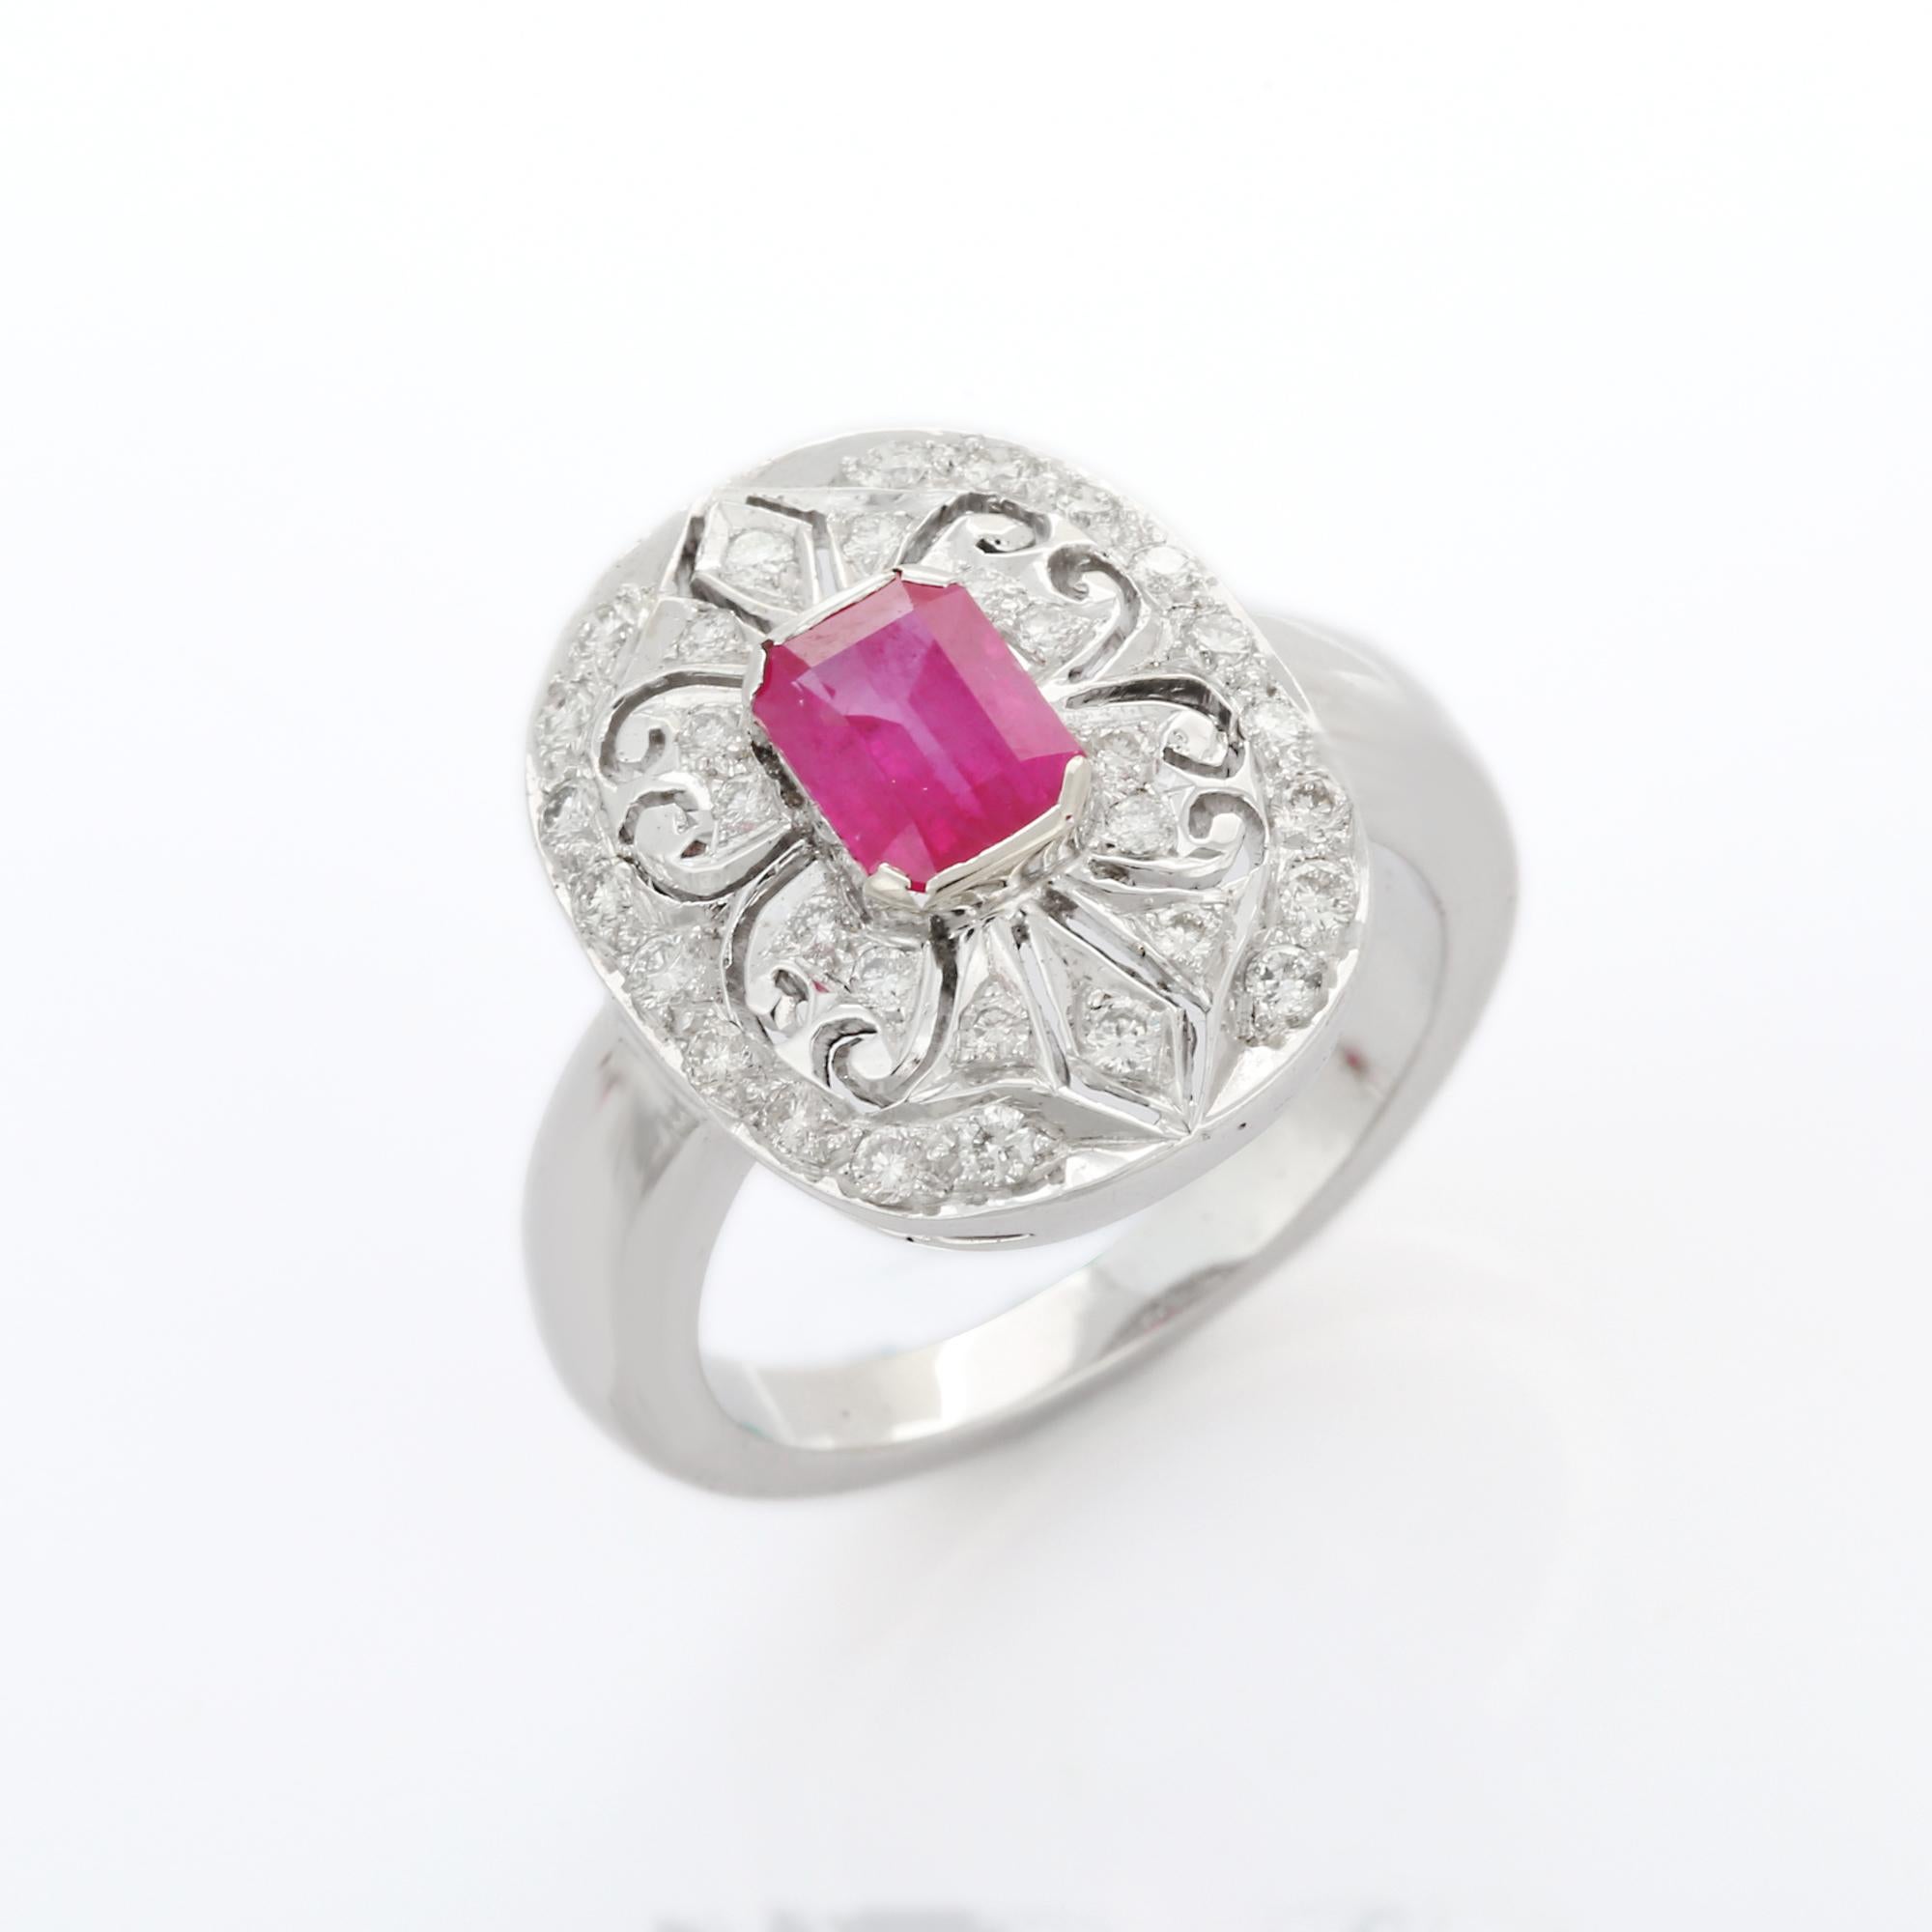 For Sale:  Clustered Diamond Cocktail Ring with 2.31 Carat Ruby in 18K White Gold Engraving 7